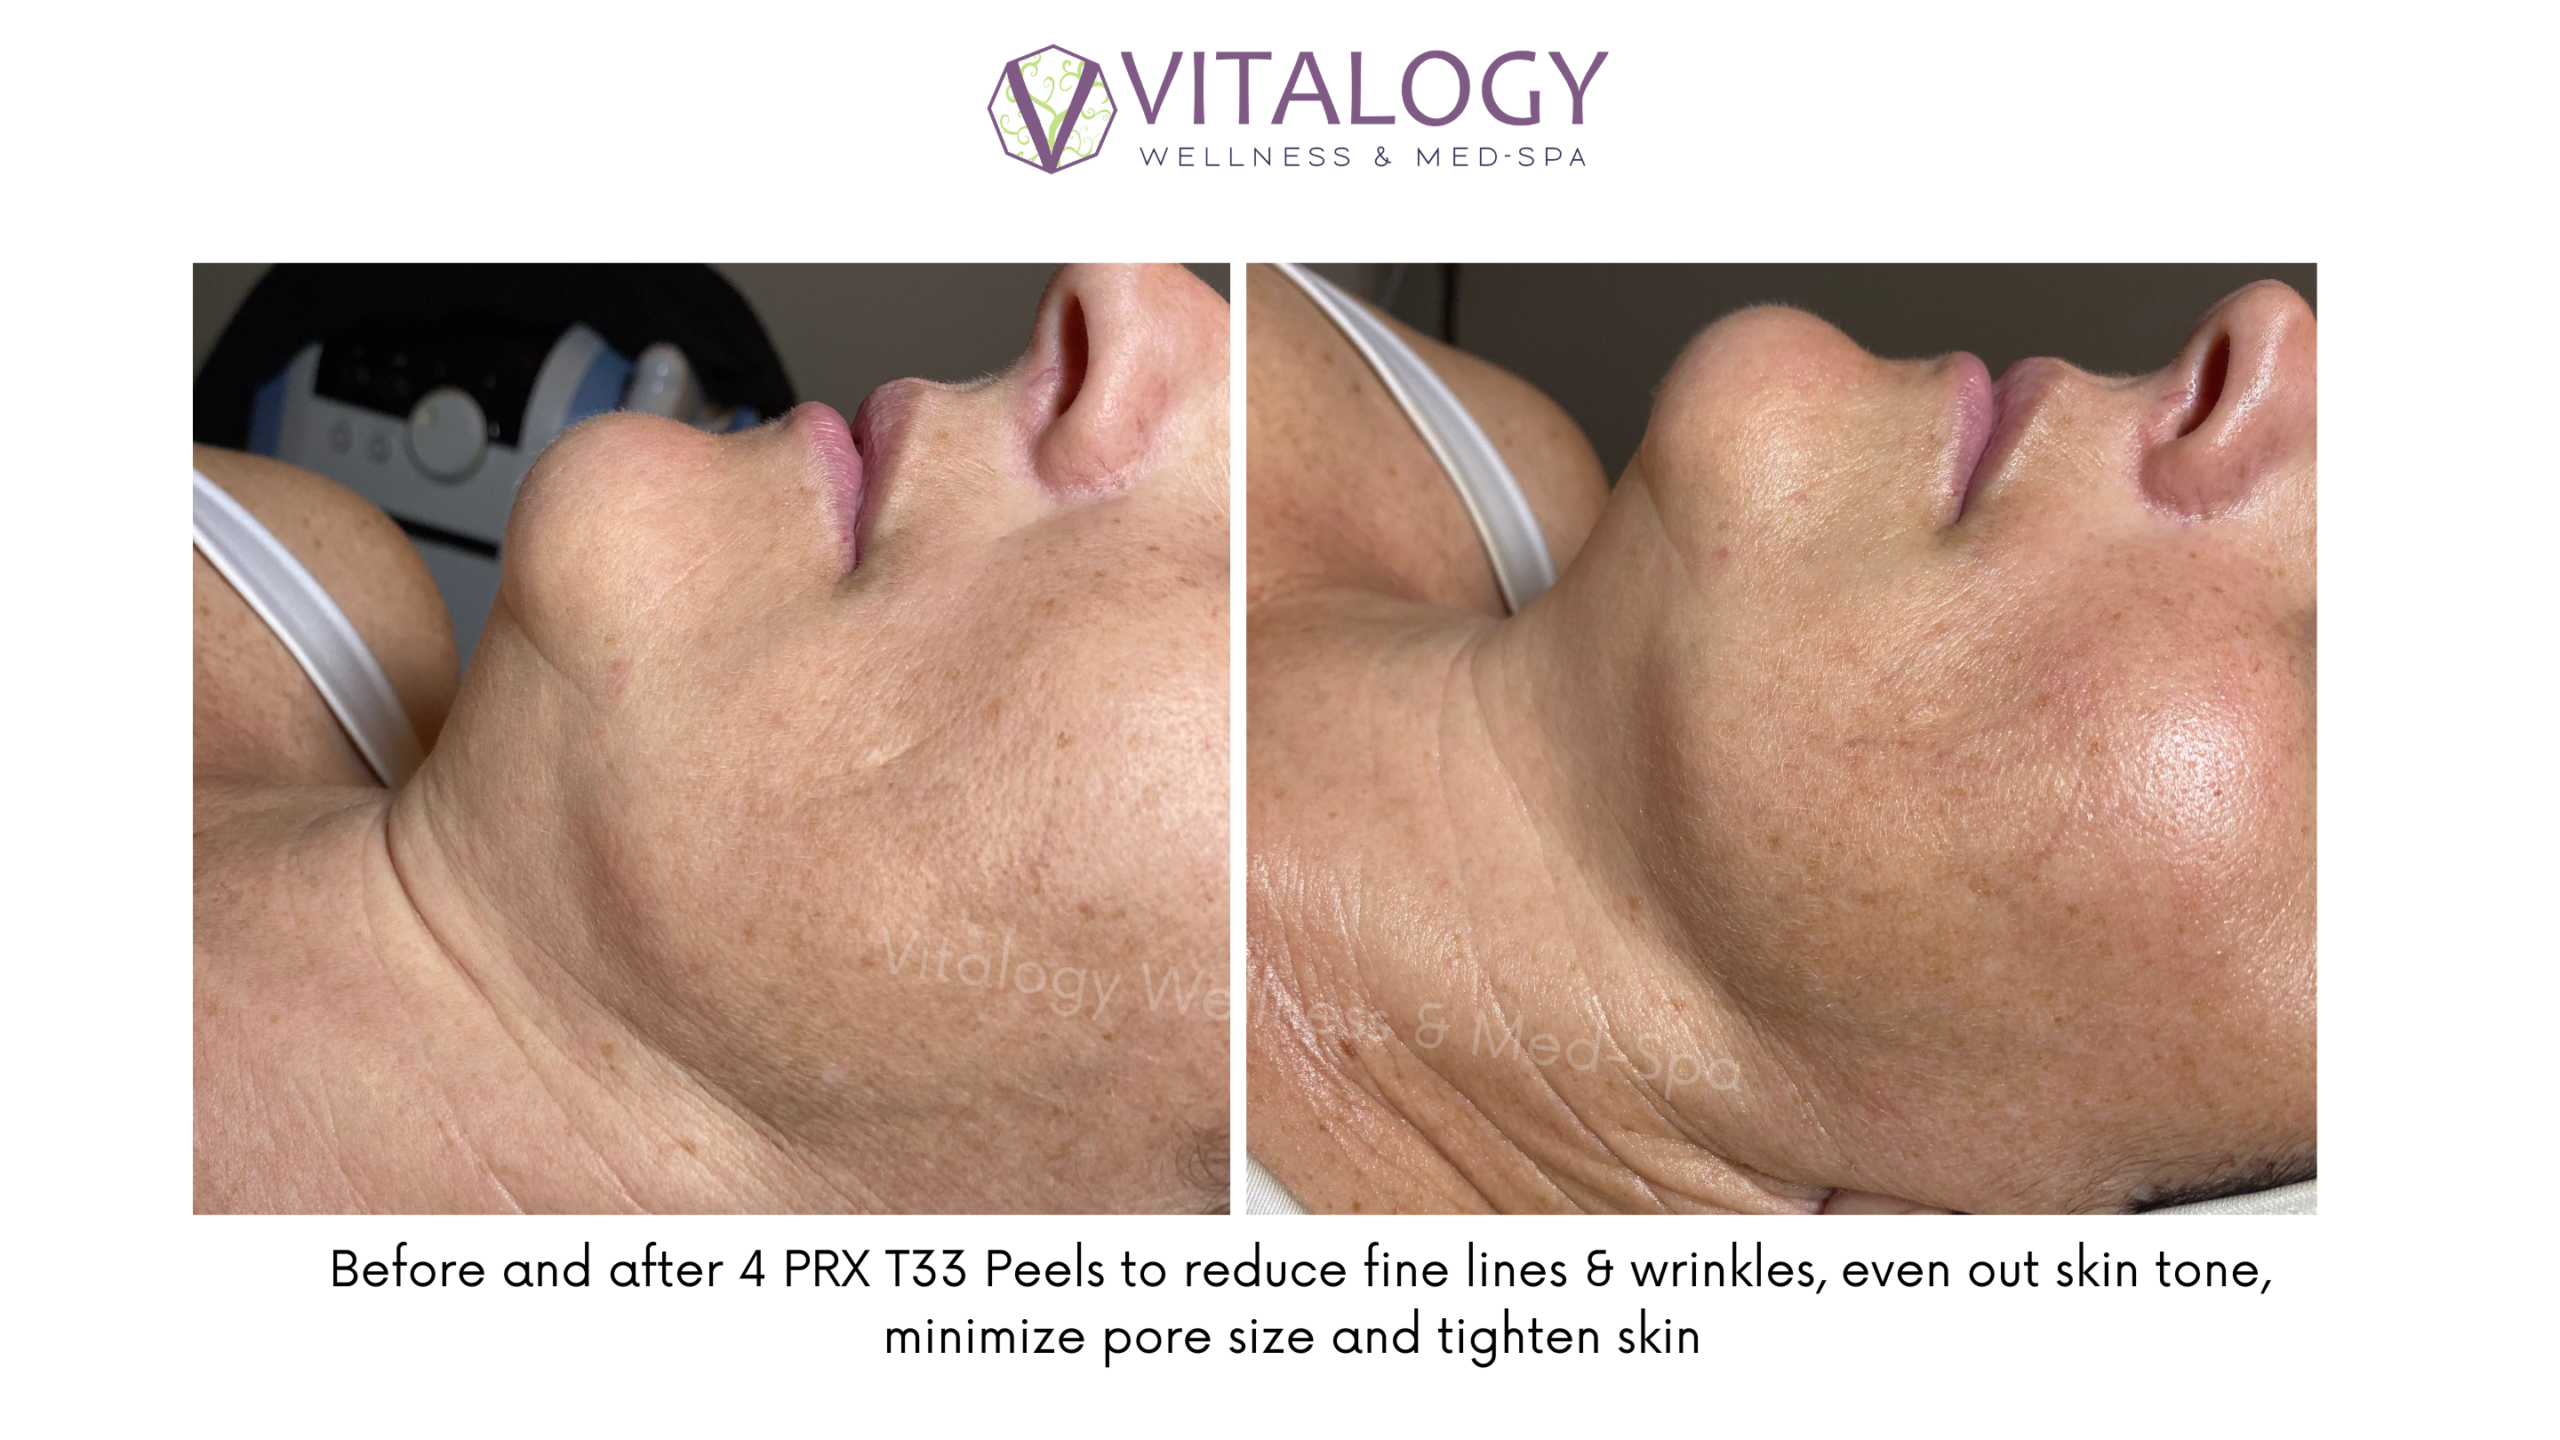 Before and after 4 PRX T33 Peels